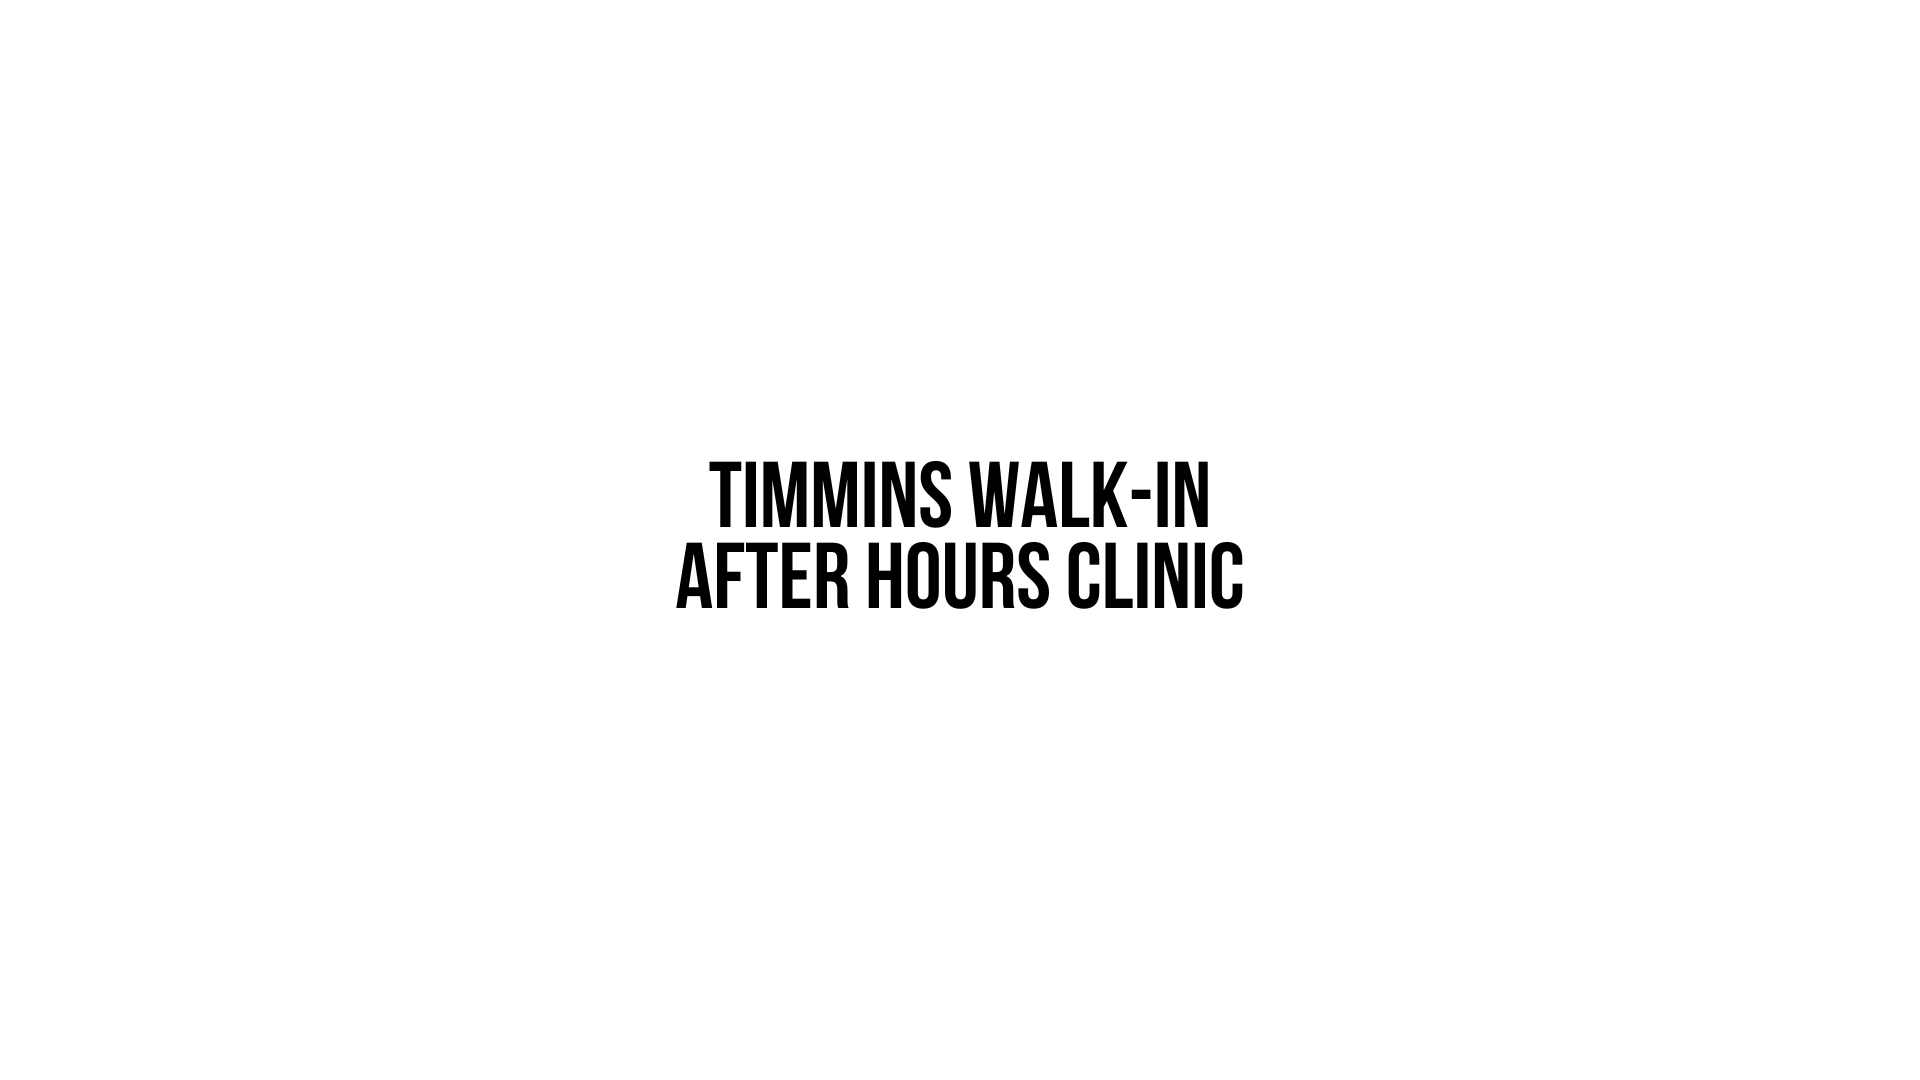 Timmins Care Black text reading "timmins walk-in after hours clinic" centered on a white background. Cochrane District Social Services Administration Board